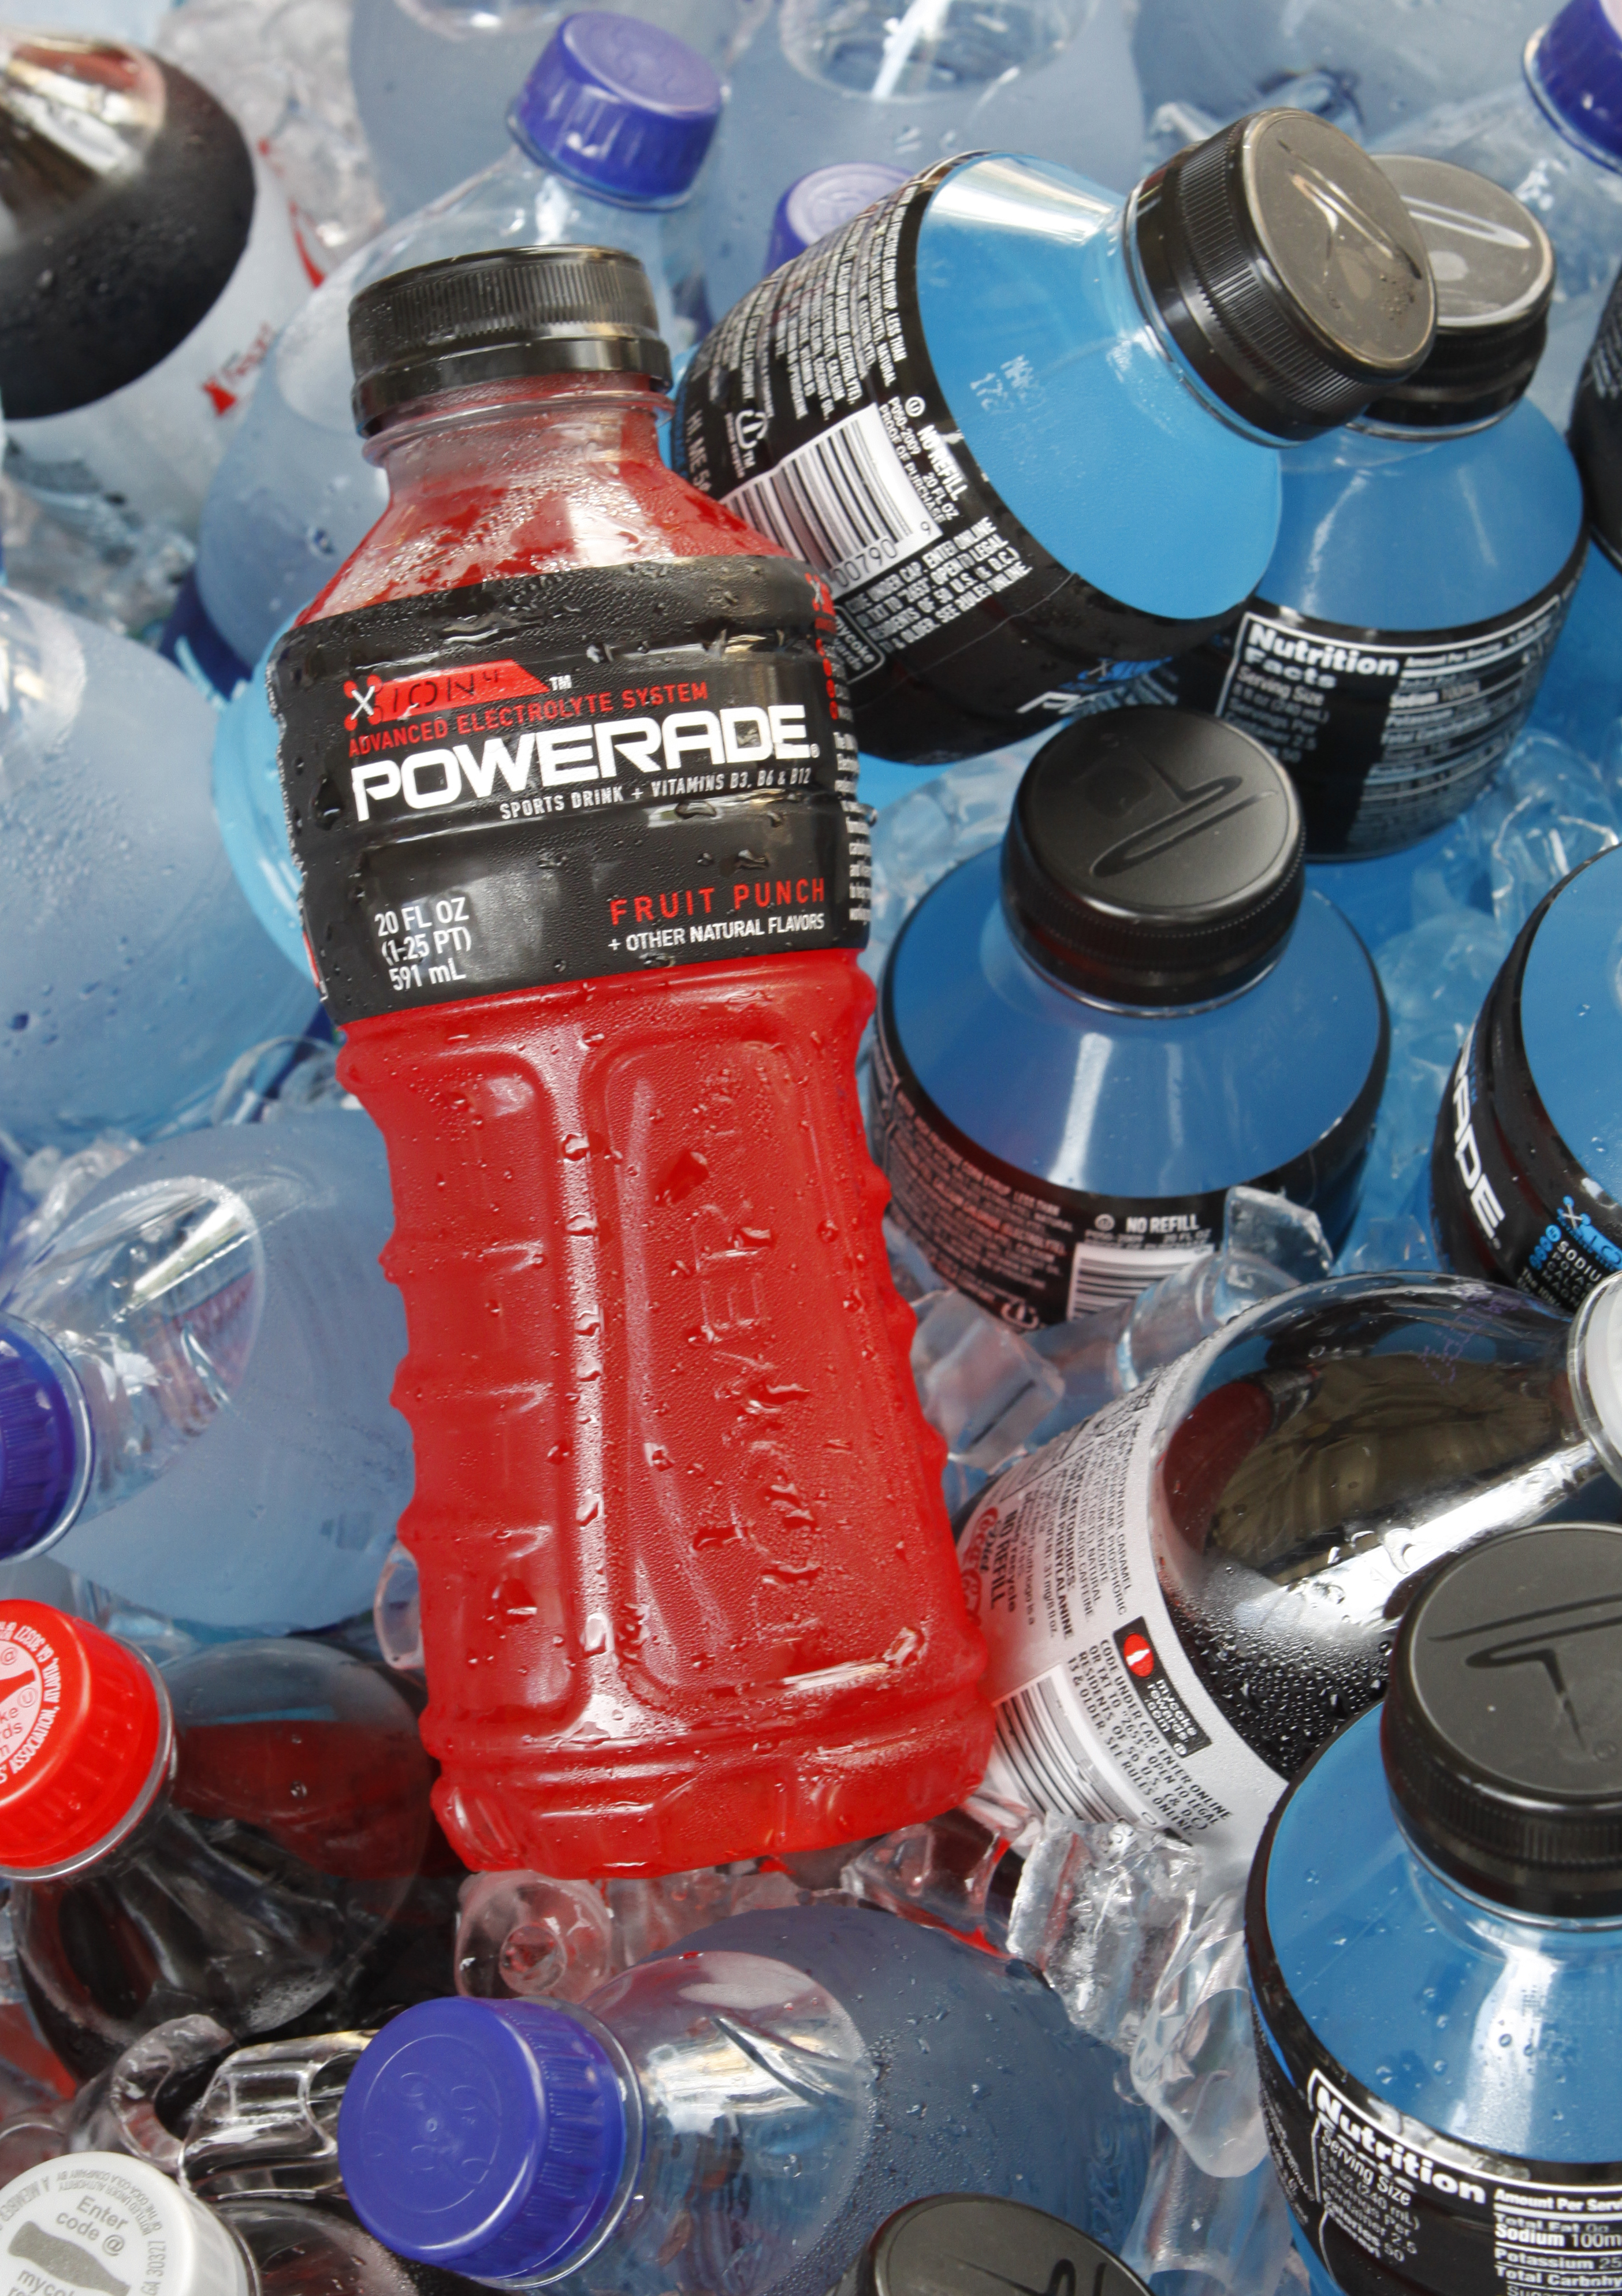  Bottles of Powerade and other Coca-Cola products in Orlando on Aug. 5, 2010.